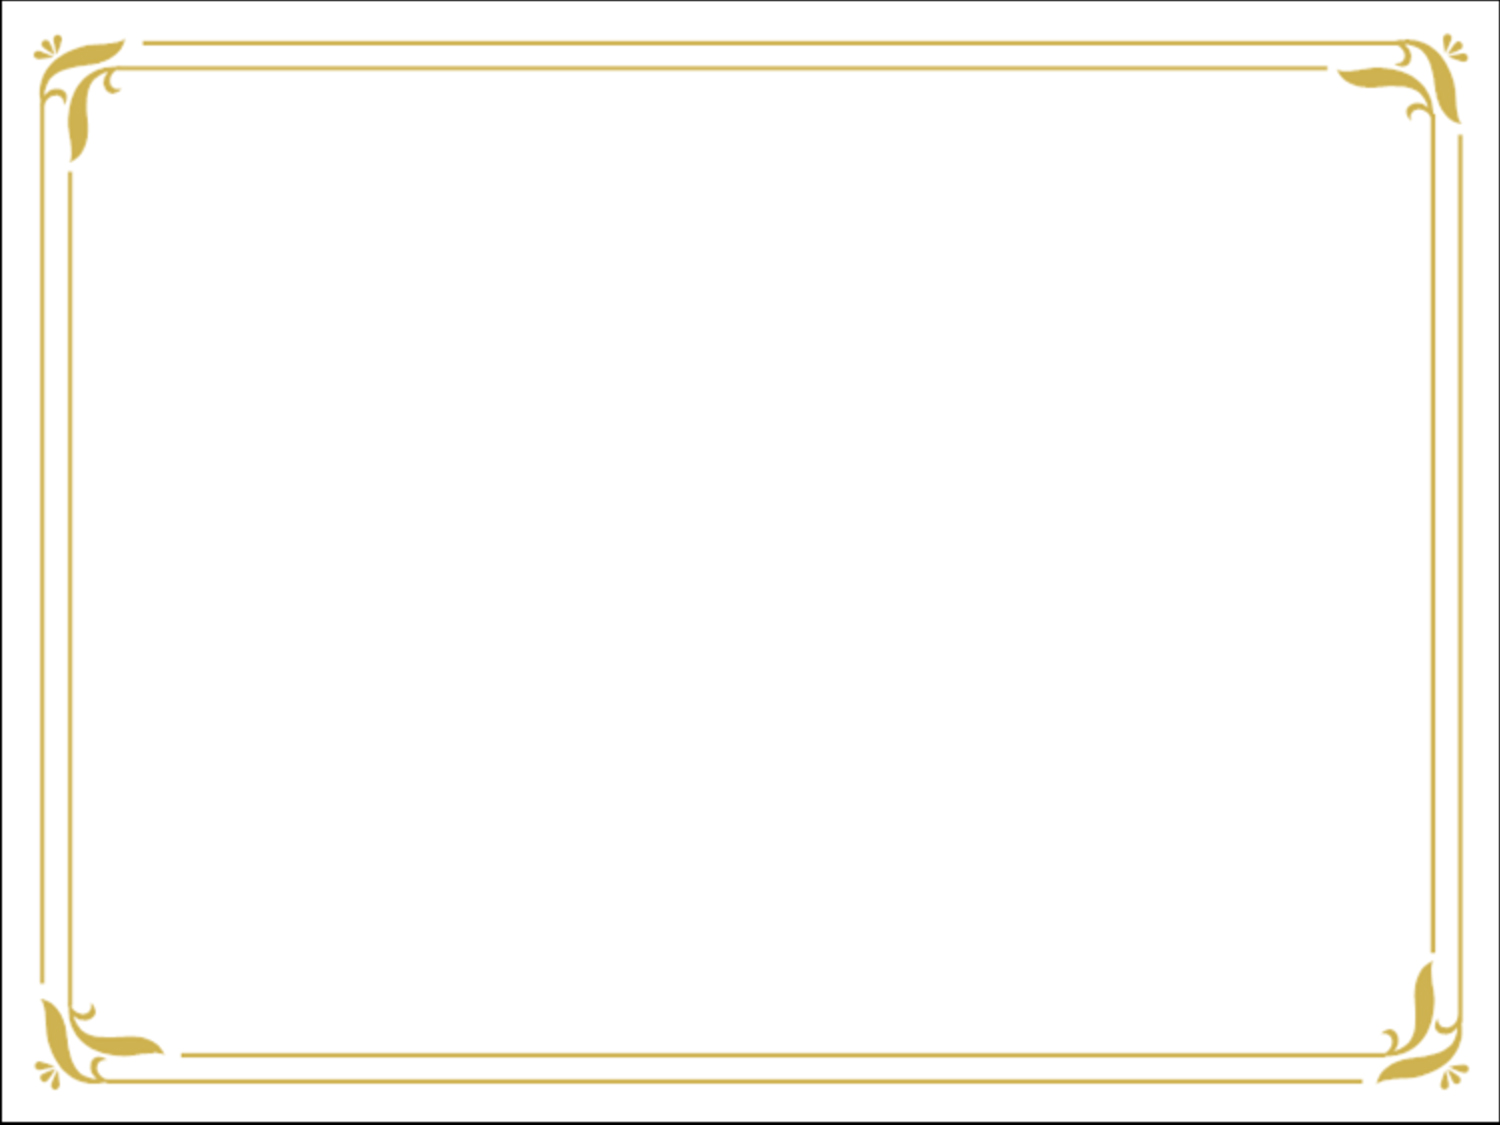 13 Certificate Gold Border Design Free Cliparts That You Can Download